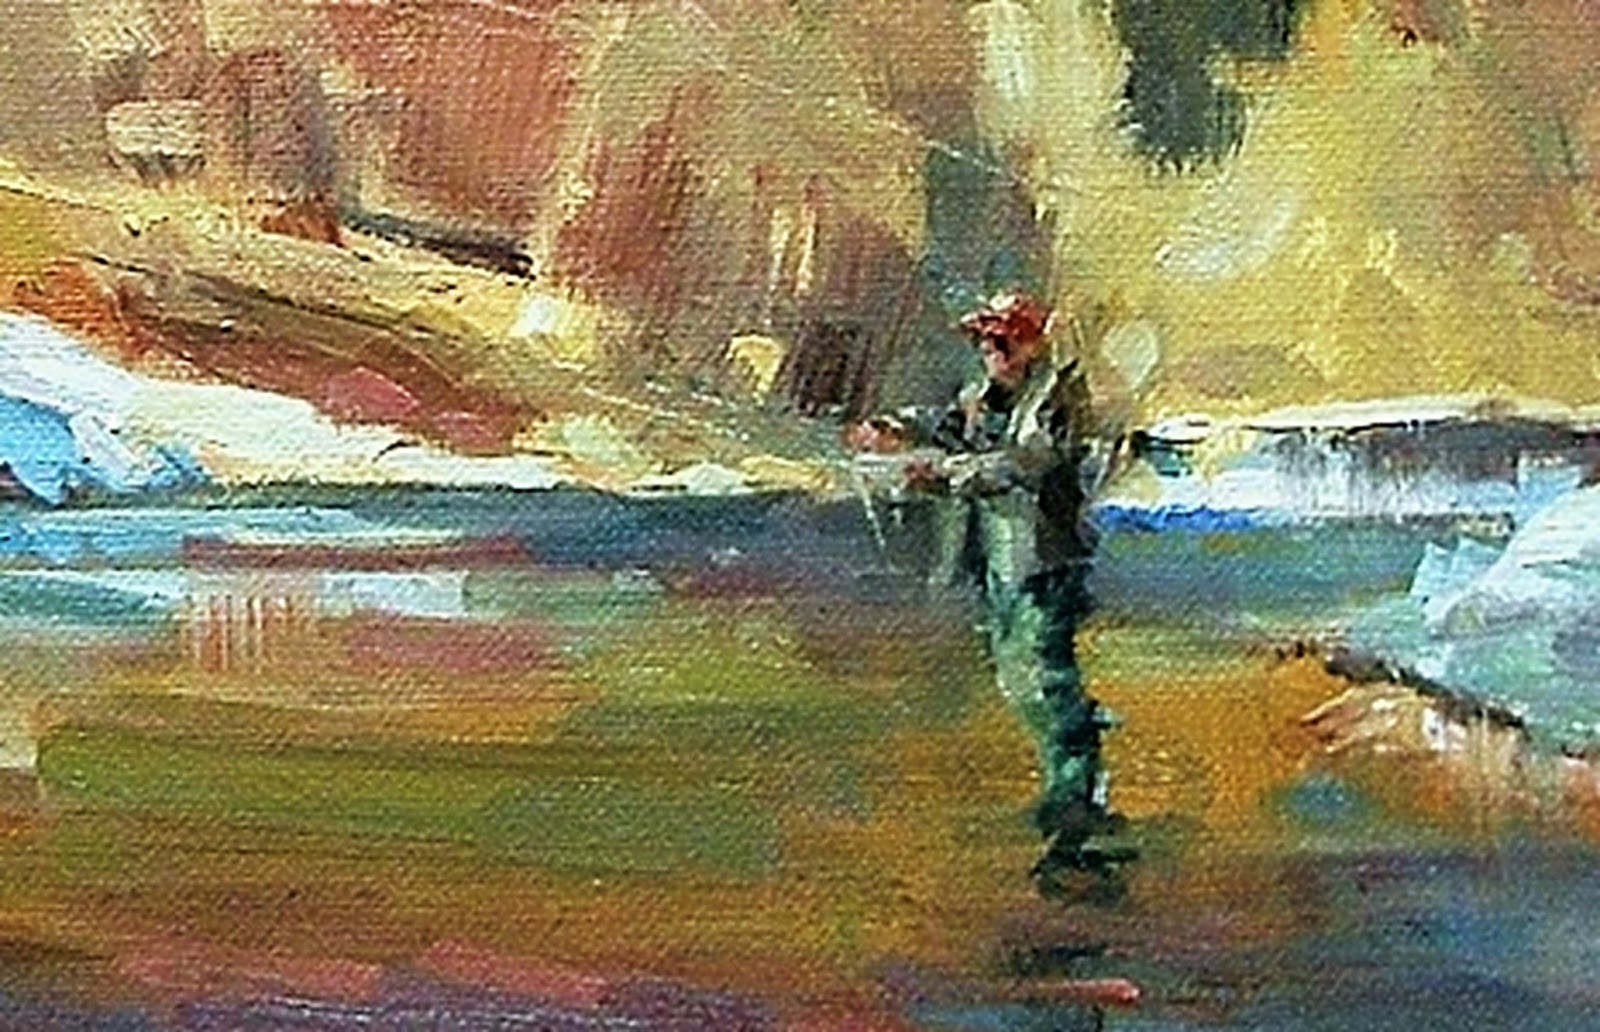 Mary Maxam - paintings: Fishing Gold - more fly fishing in the Northwest